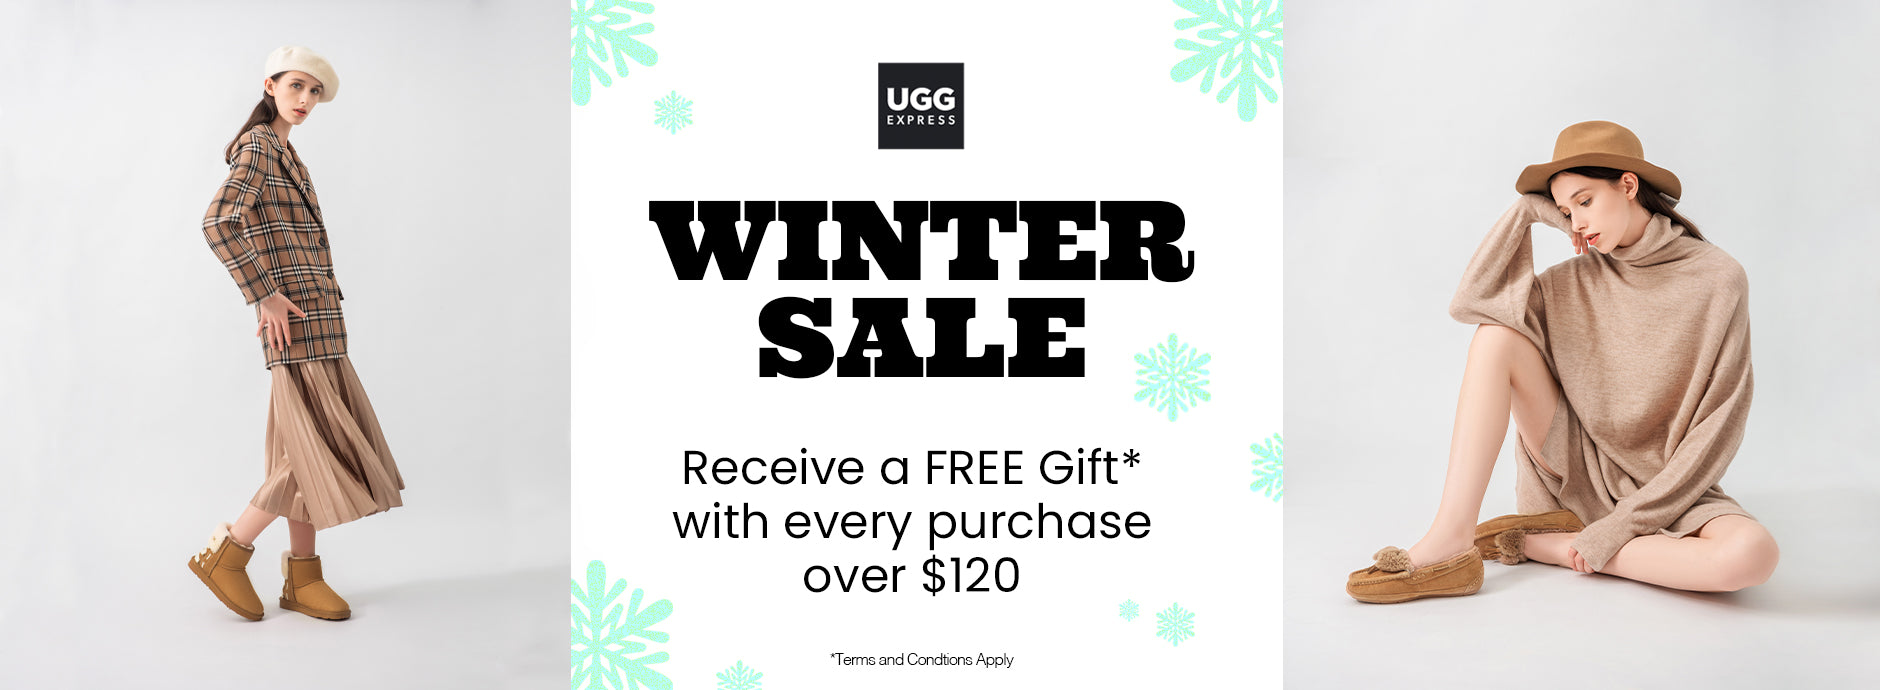 ugg afterpay us